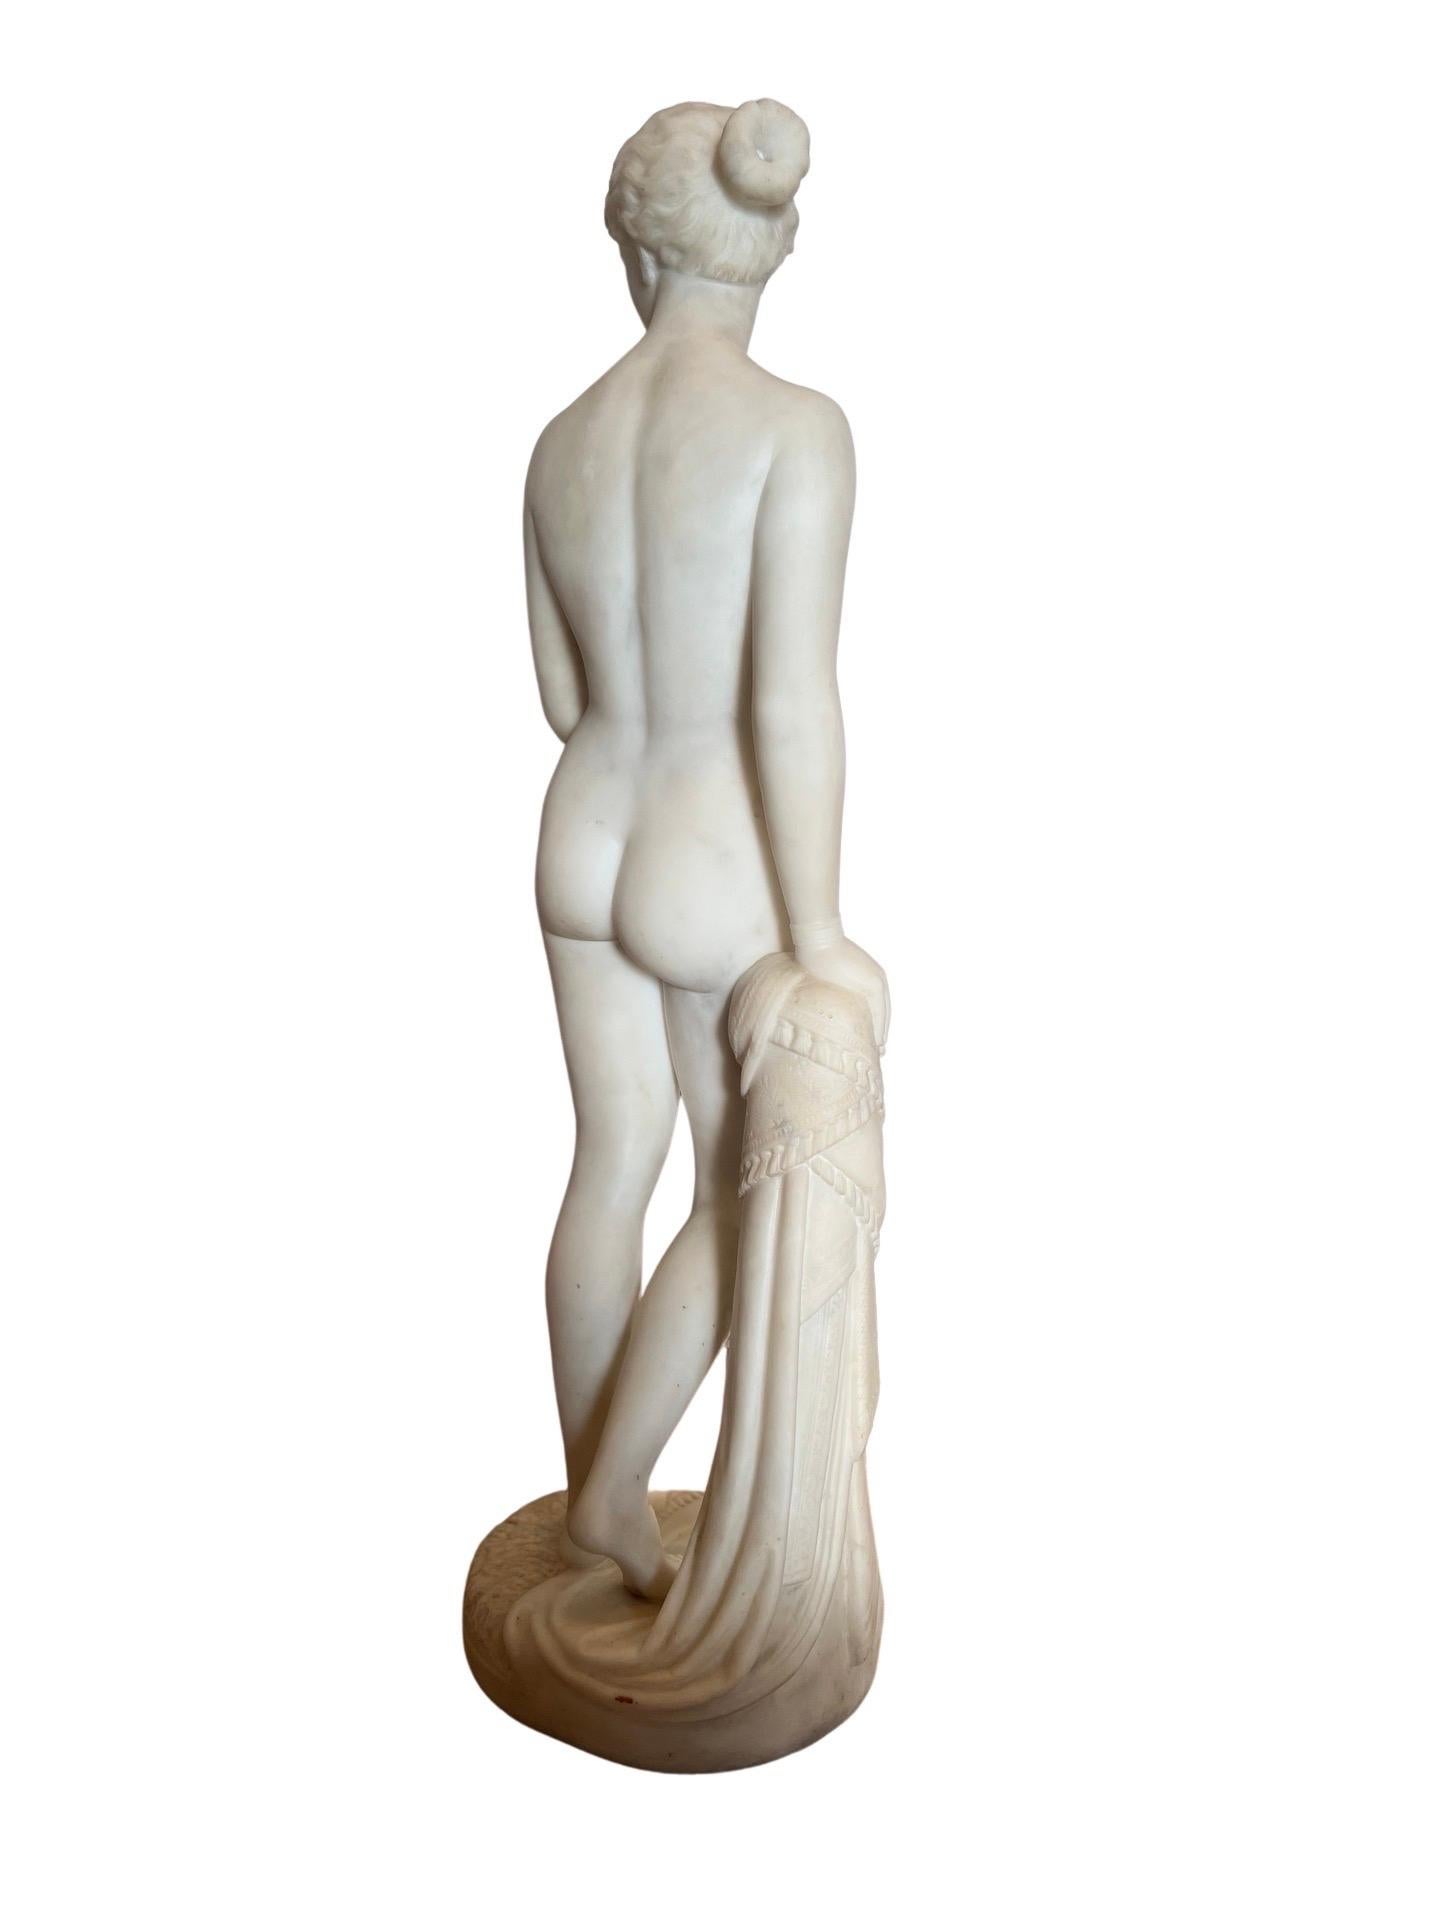 After Hiram Powers, Grand Tour Marble Sculpture of “the Greek Slave” For Sale 7